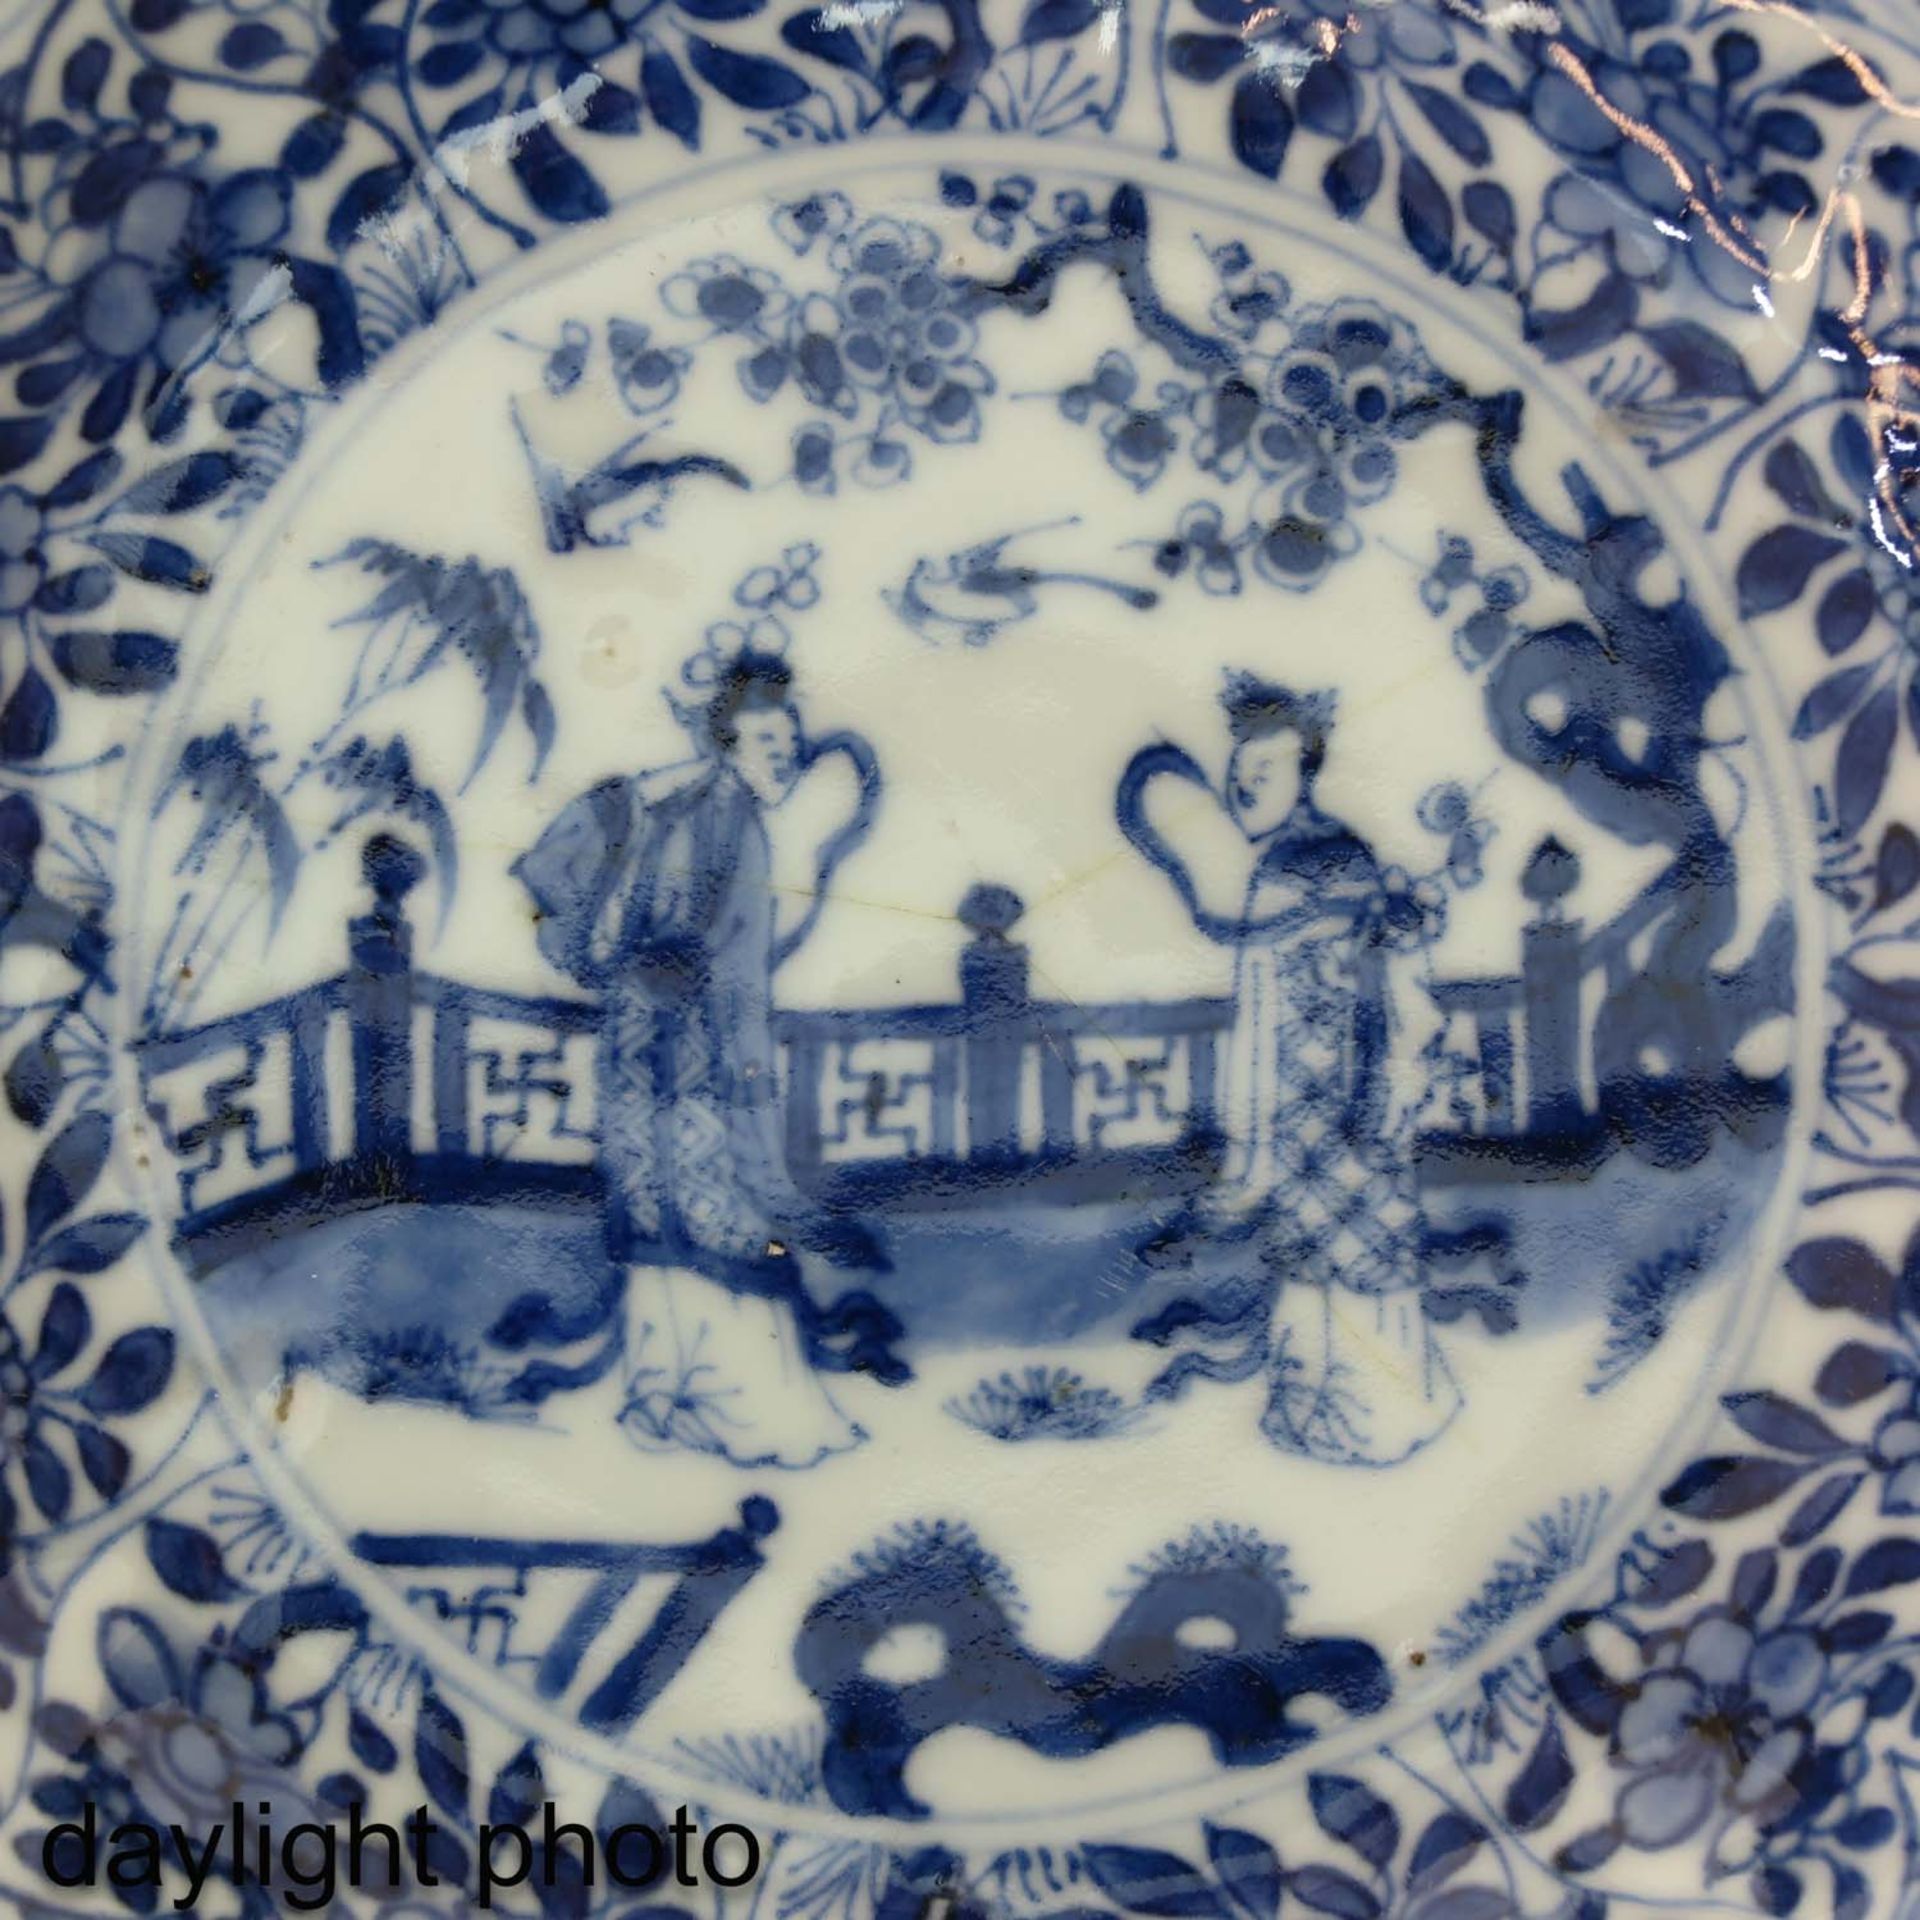 A Small Blue and White Plate - Image 5 of 5